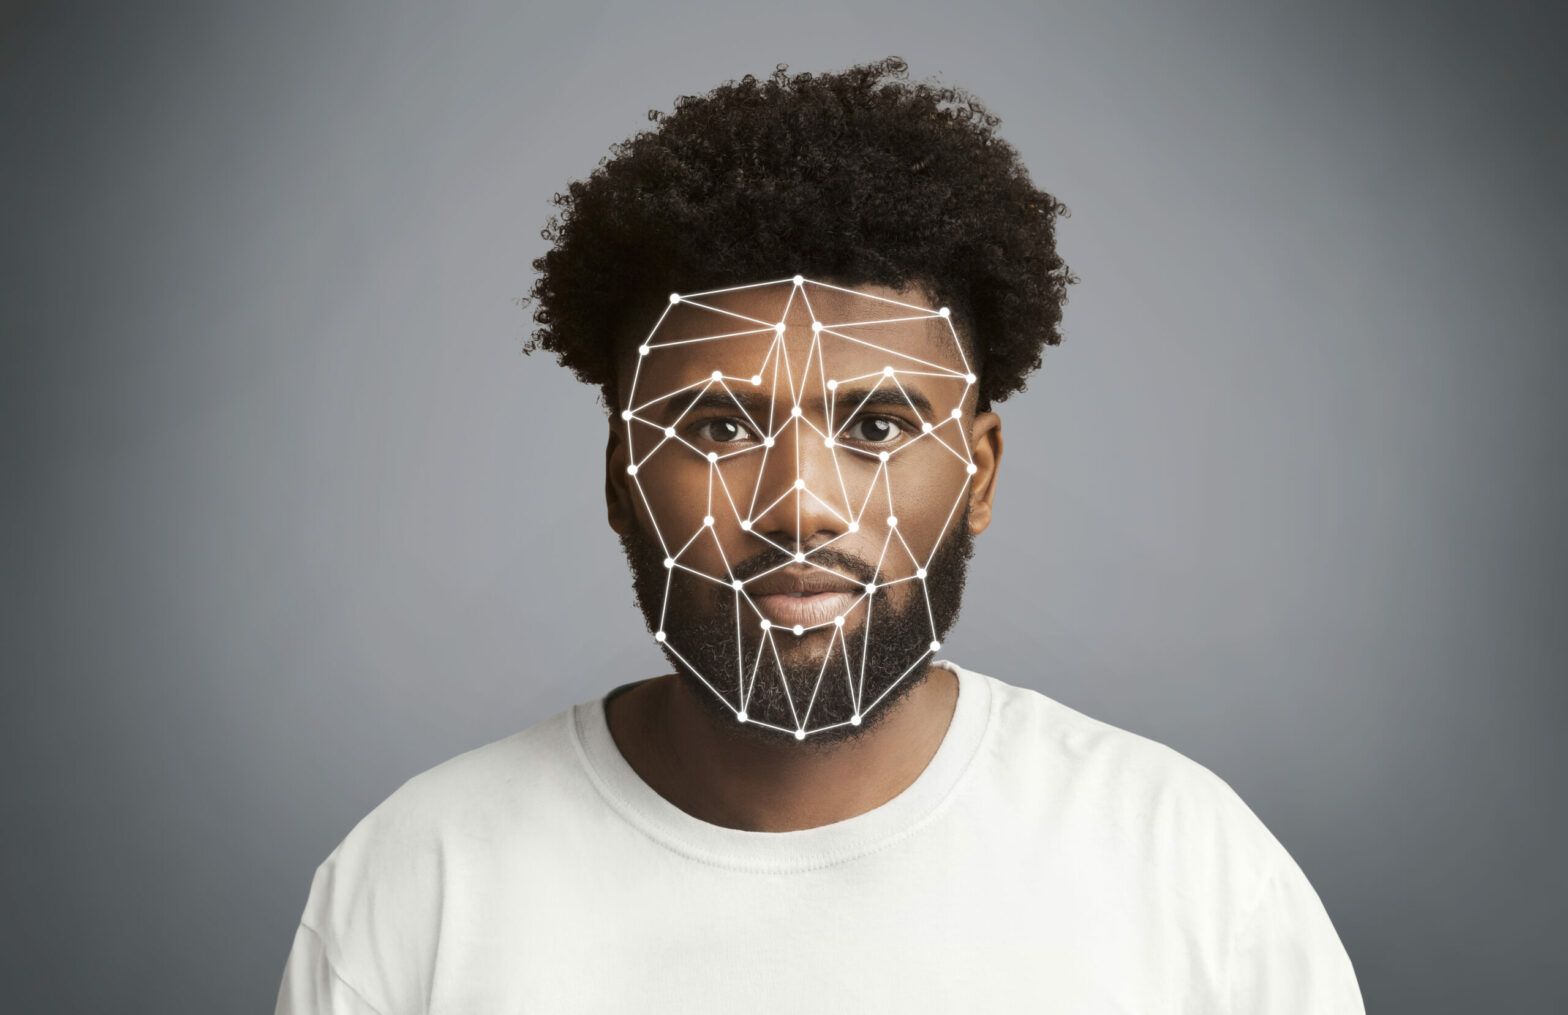 Asset managers unite in human rights pledge on facial recognition concerns